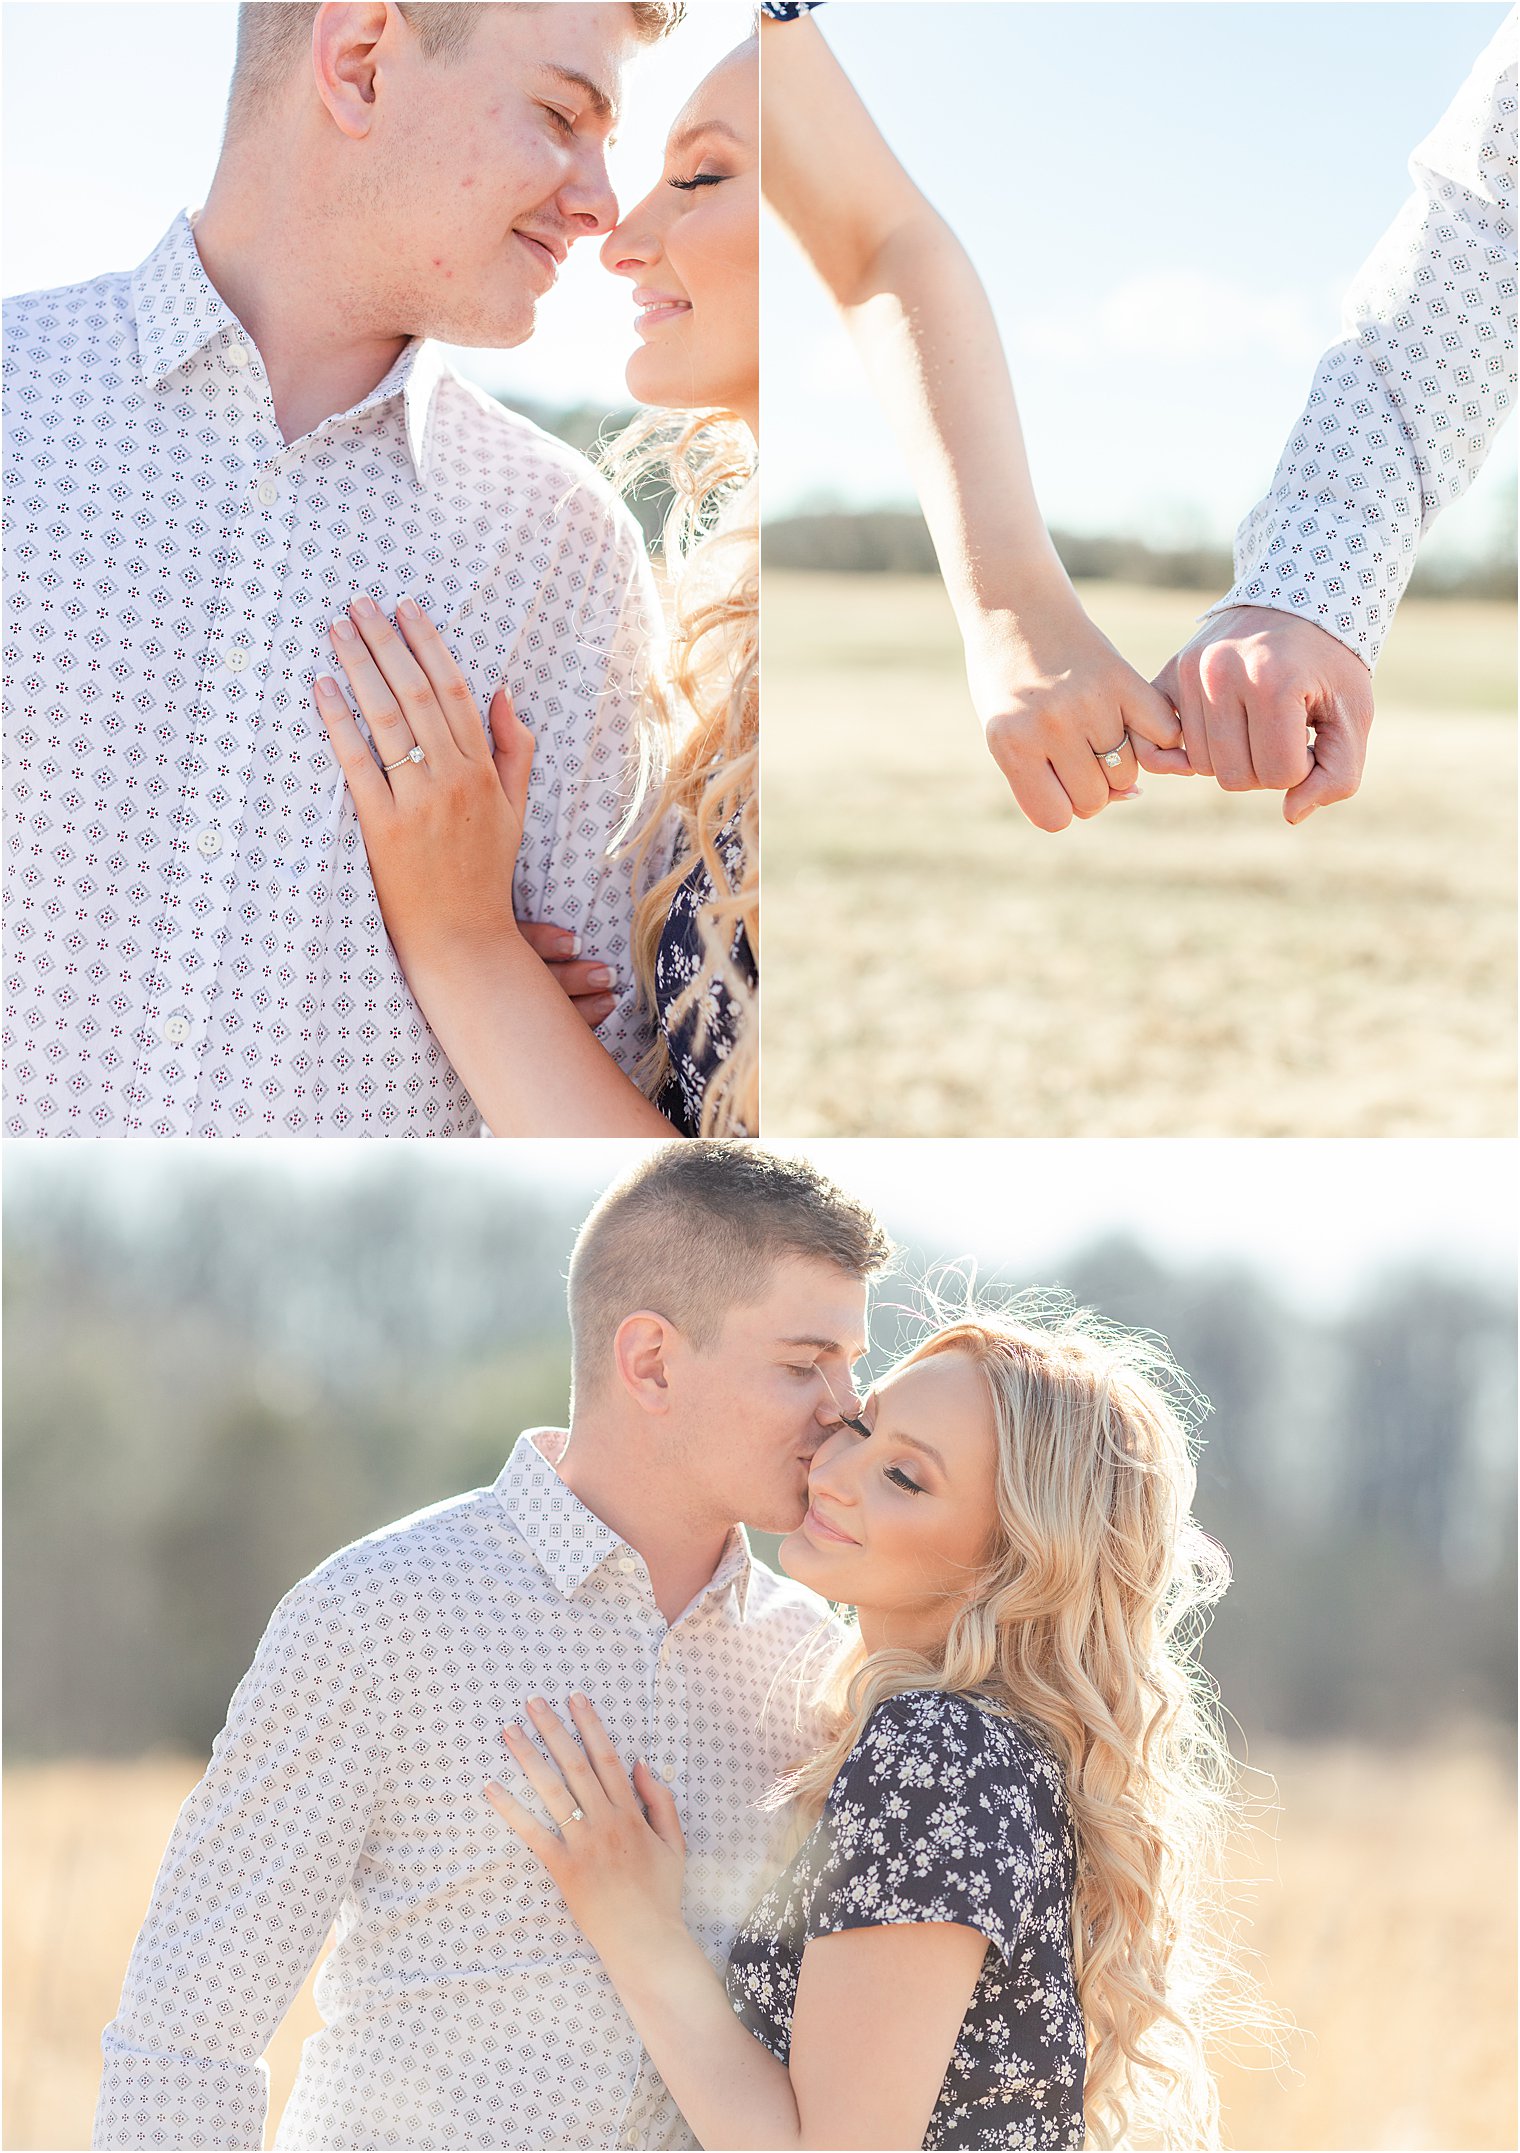 Couple pose with heads close and hand on chest to feature engagement ring 